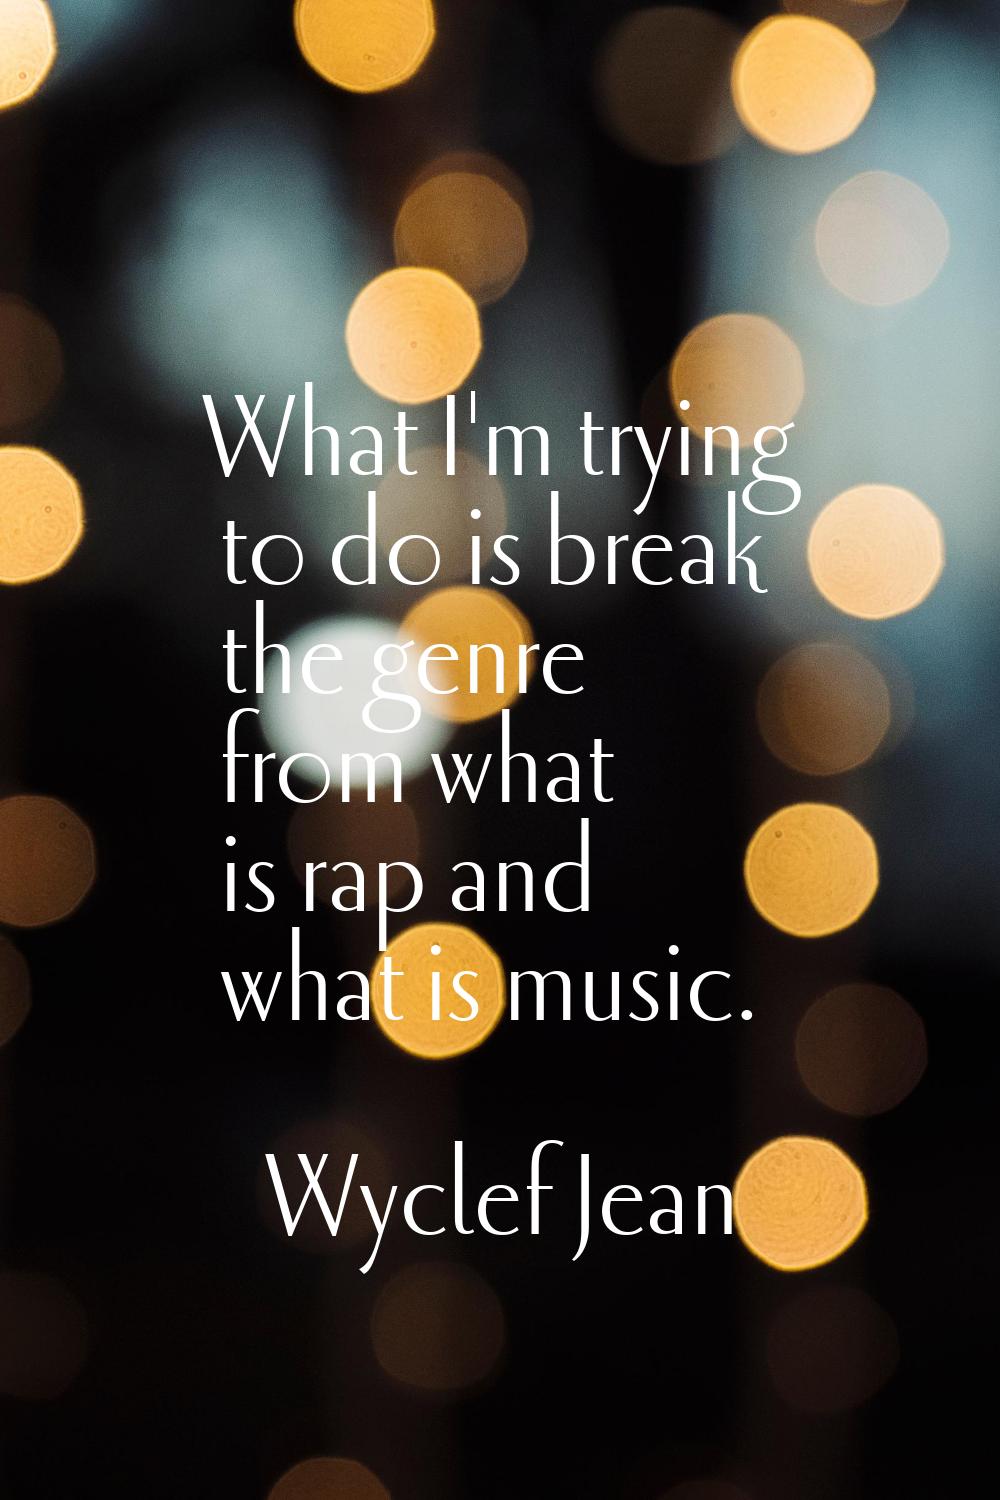 What I'm trying to do is break the genre from what is rap and what is music.